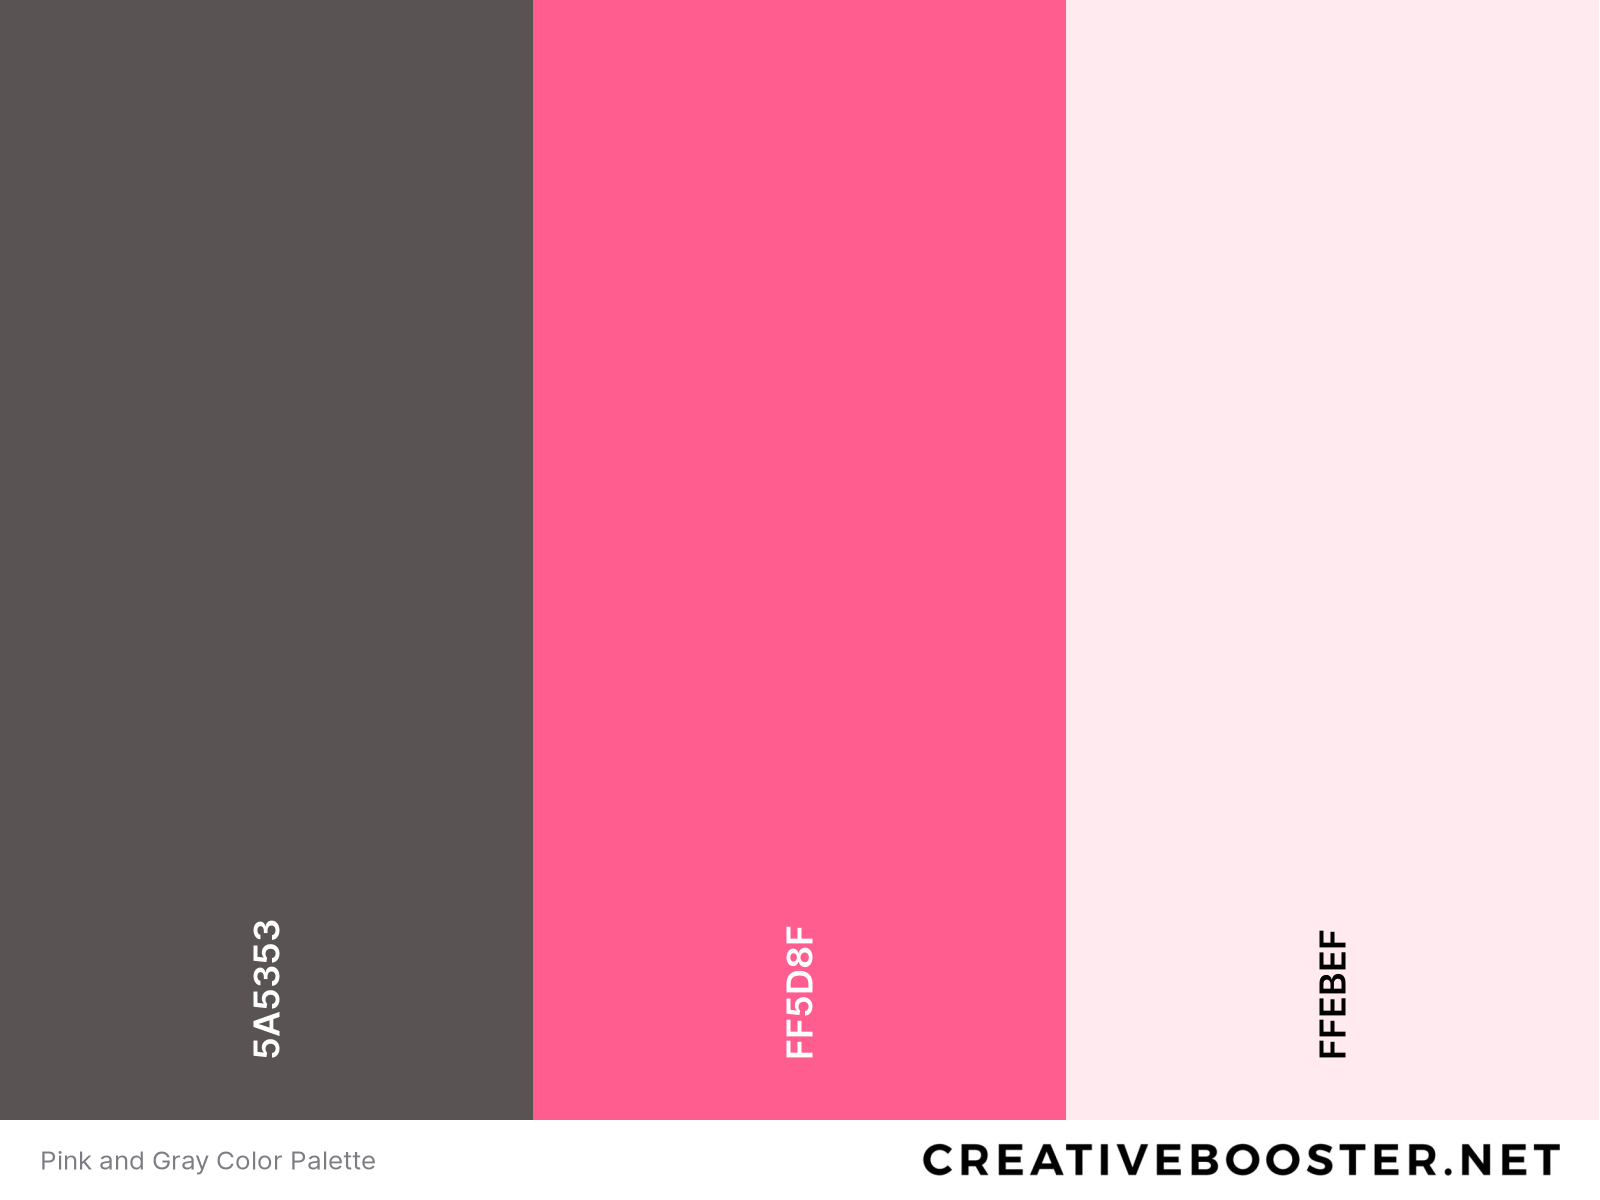 Pink and Gray Color Palette